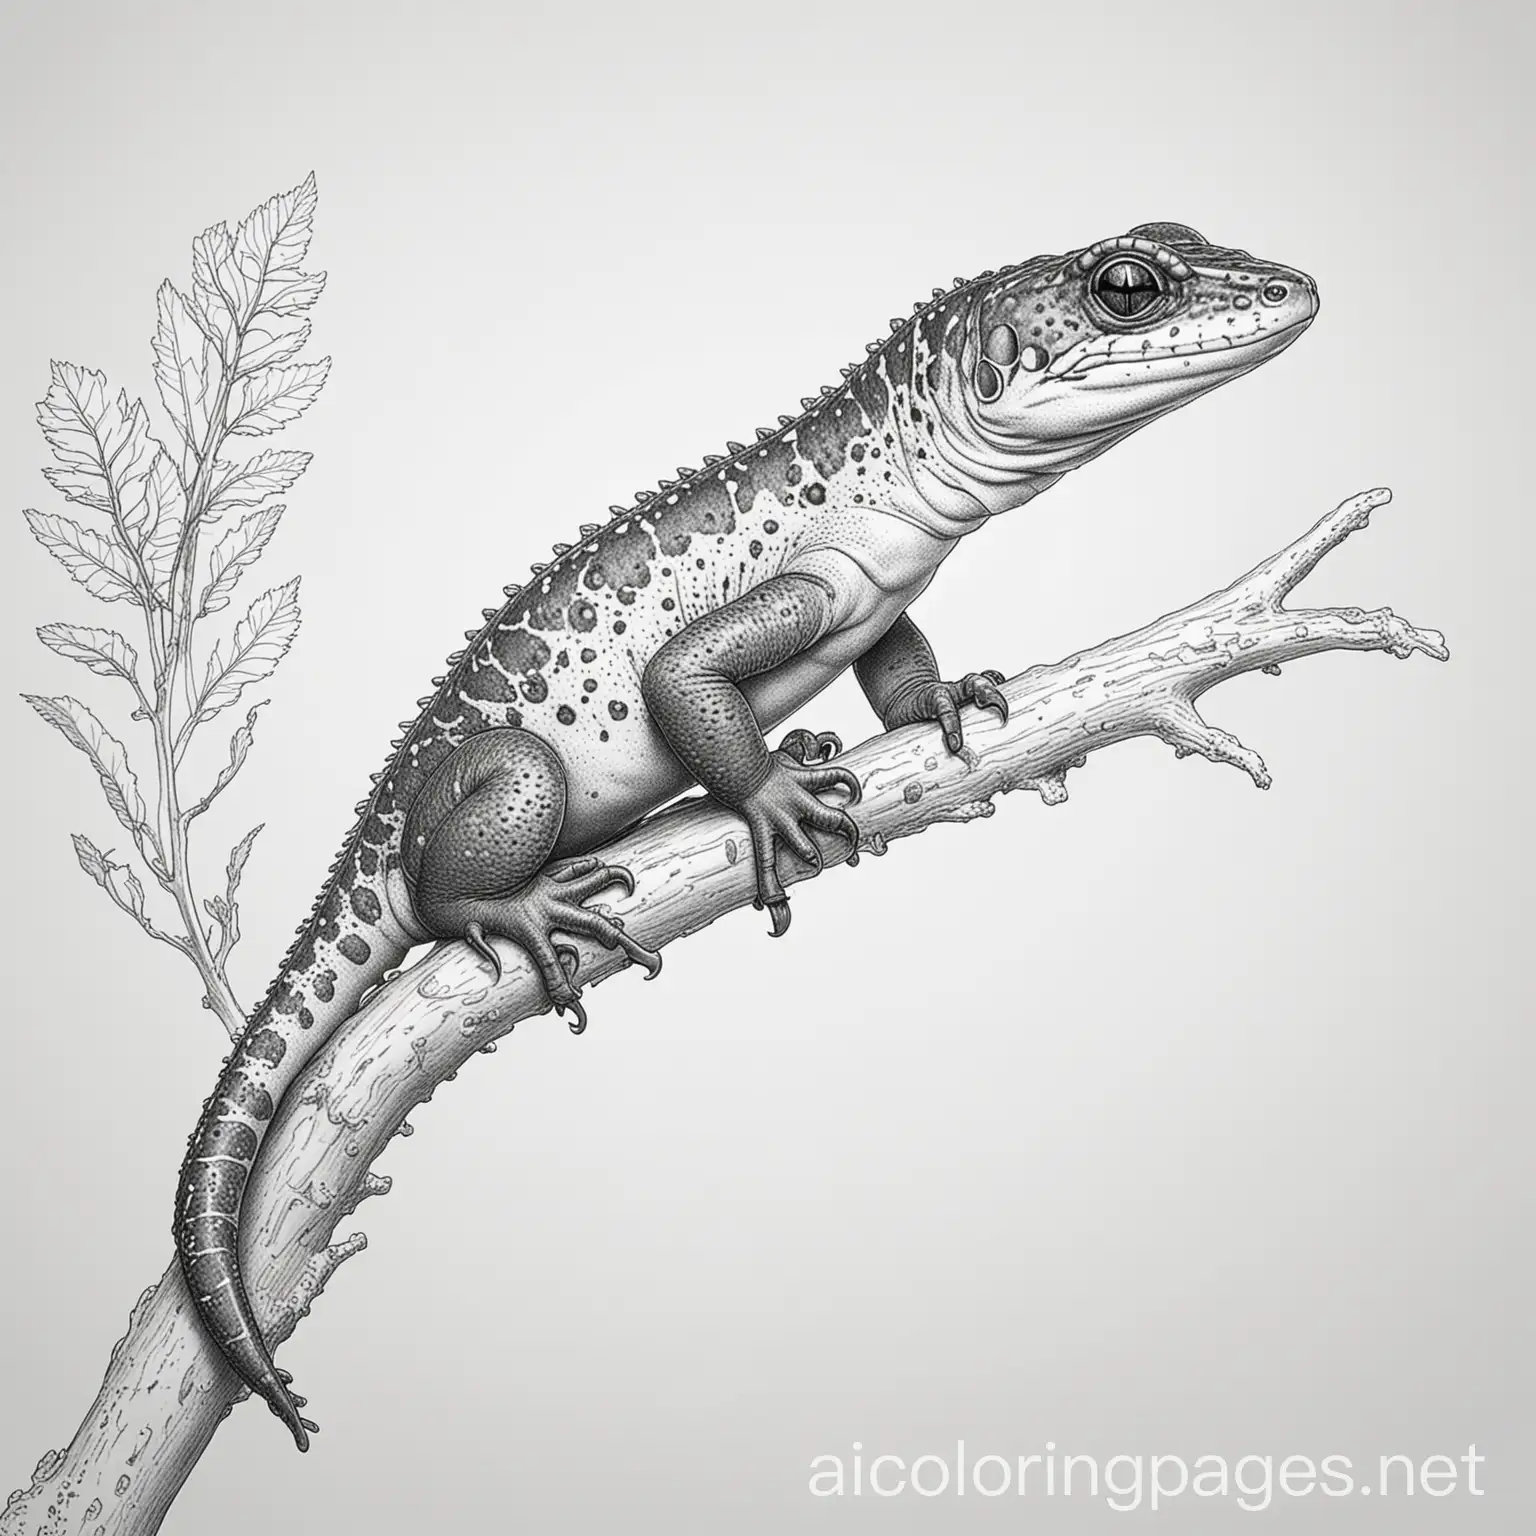 Salamander-on-Branch-Coloring-Page-Detailed-Line-Art-with-White-Background